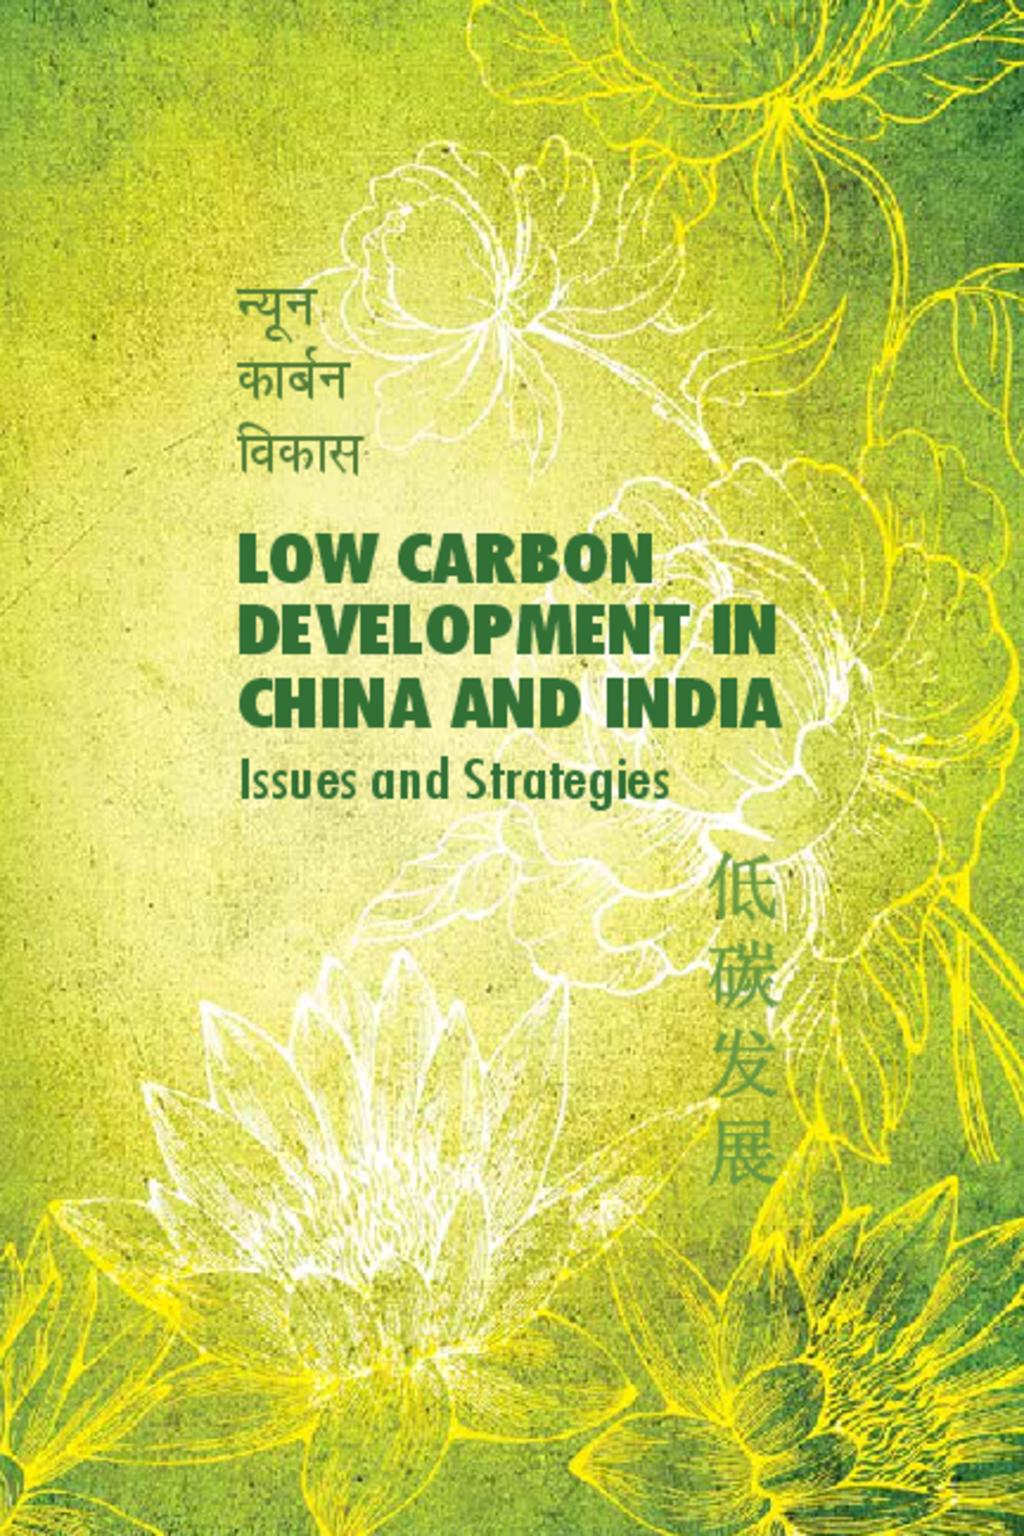 low carbon development in India